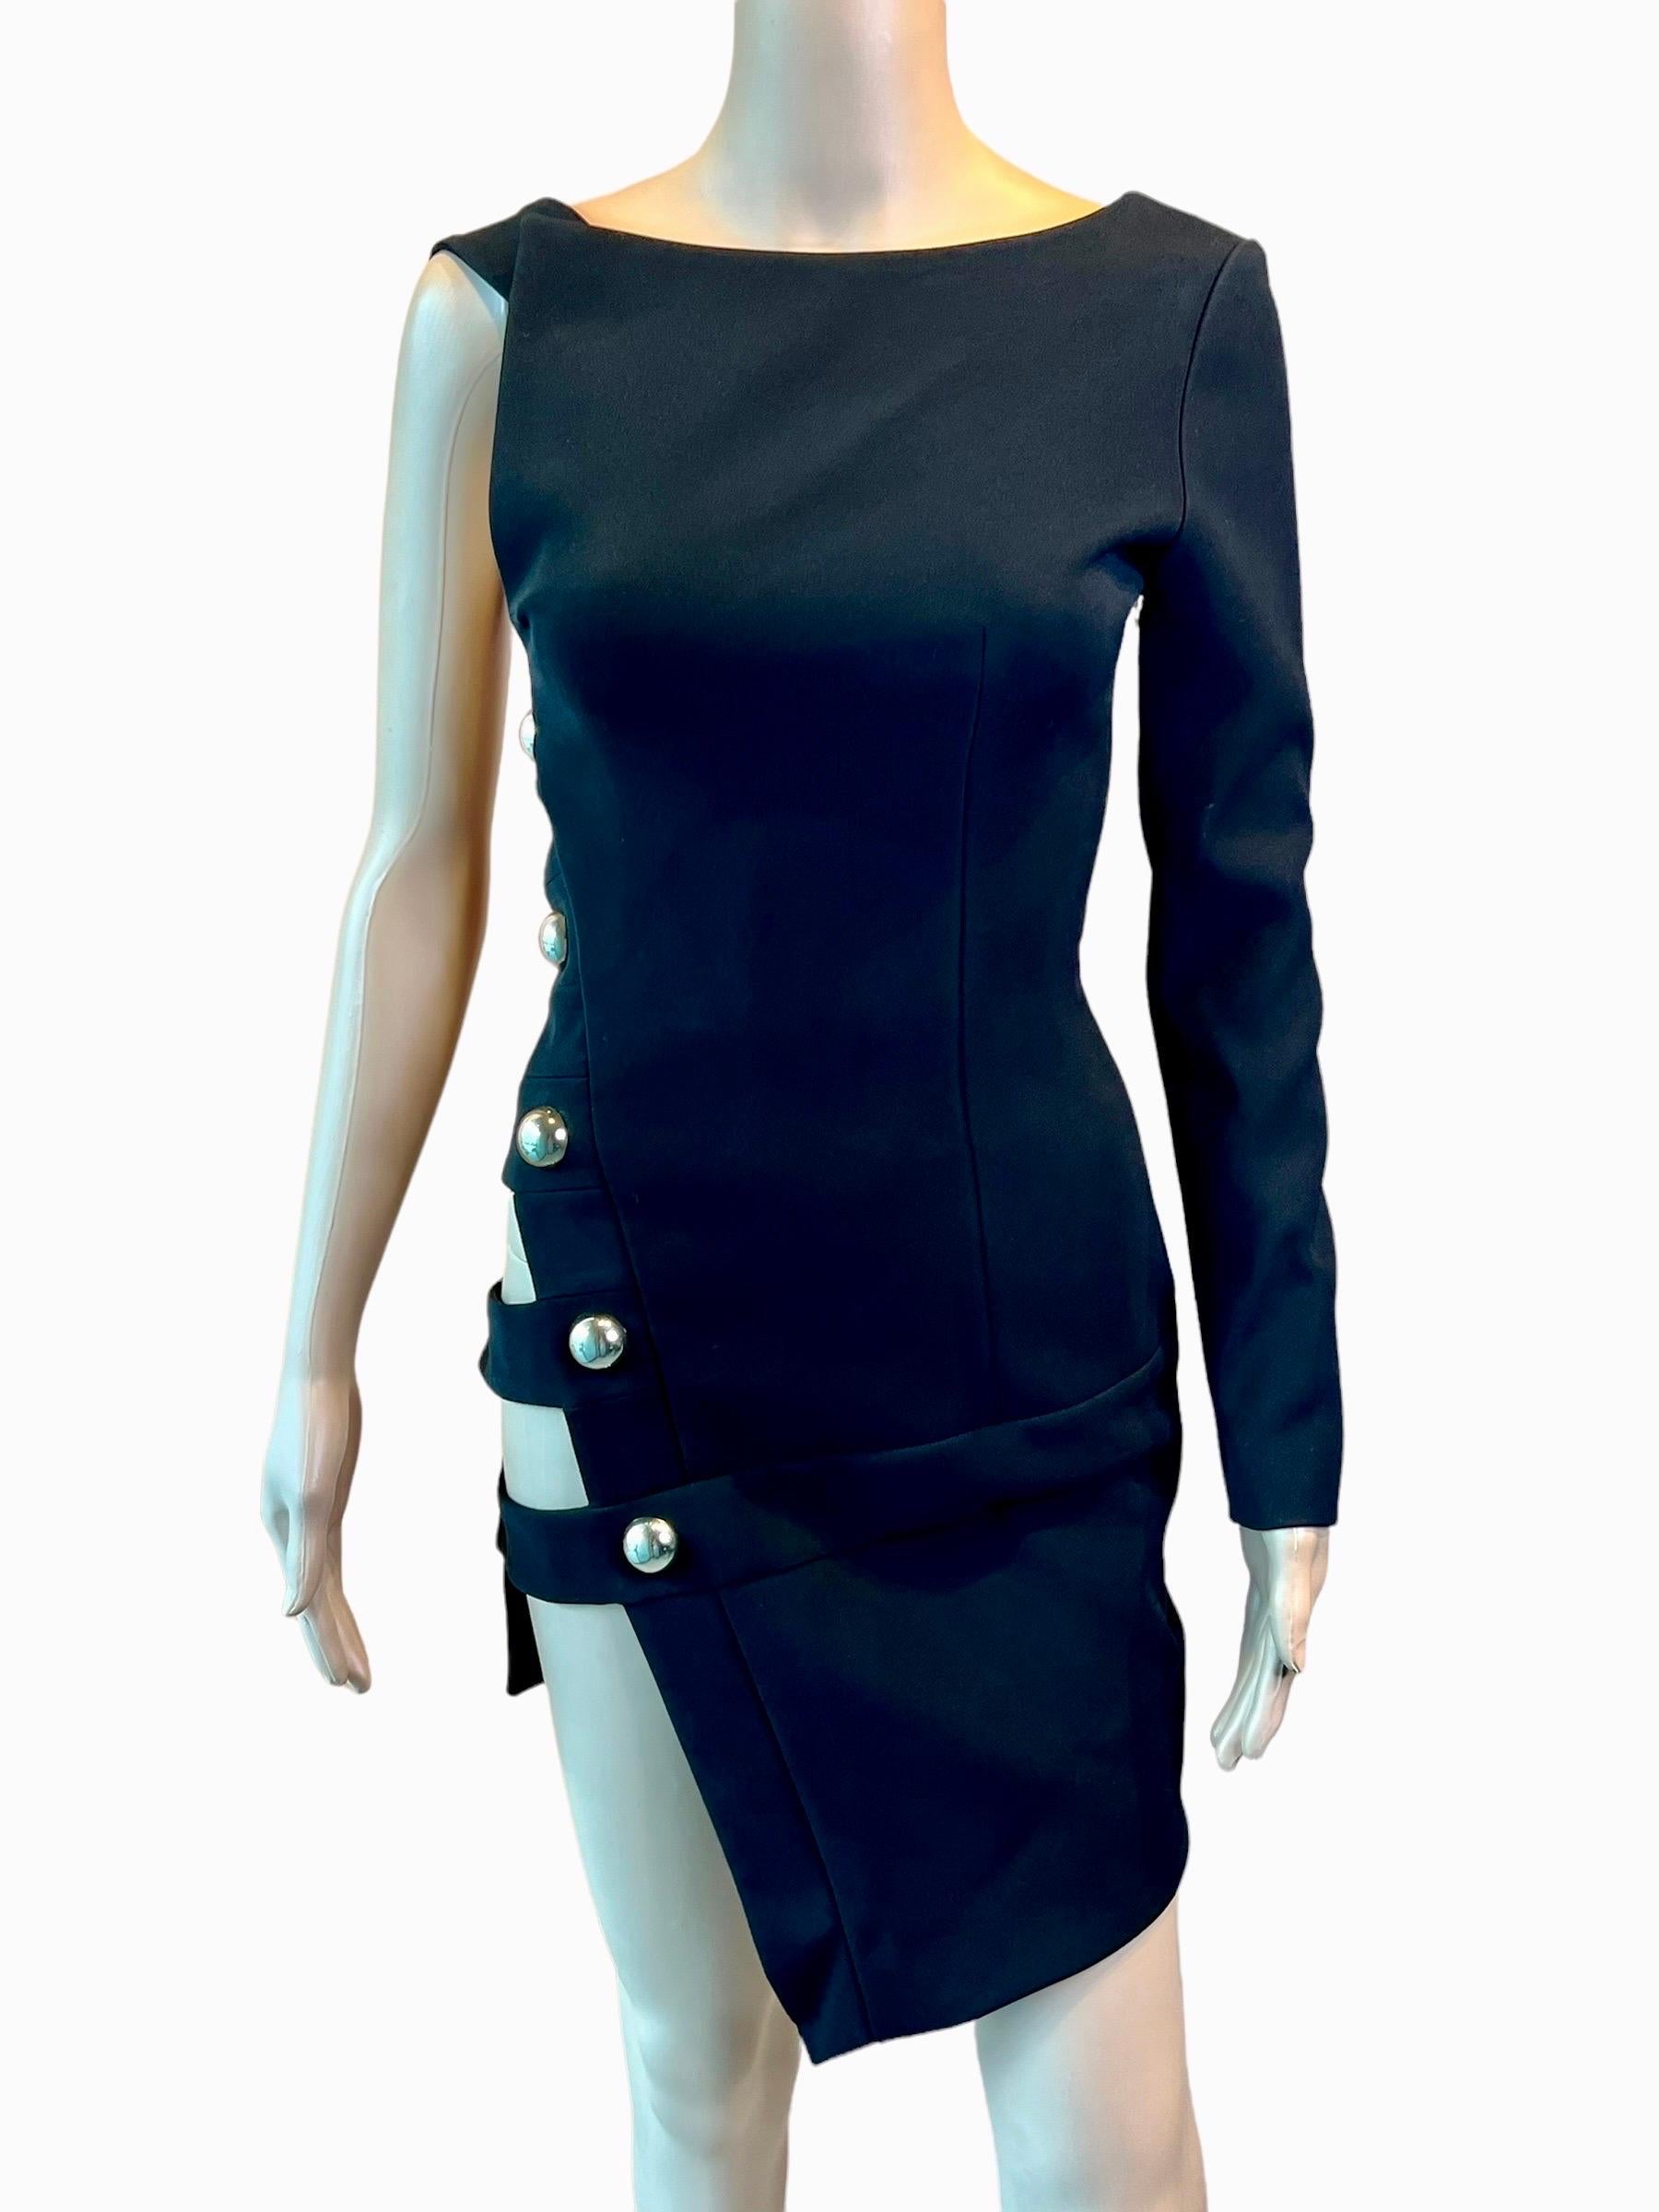 Anthony Vaccarello S/S 2014 Runway Cutout One Sleeve Black Mini Dress For Sale 2